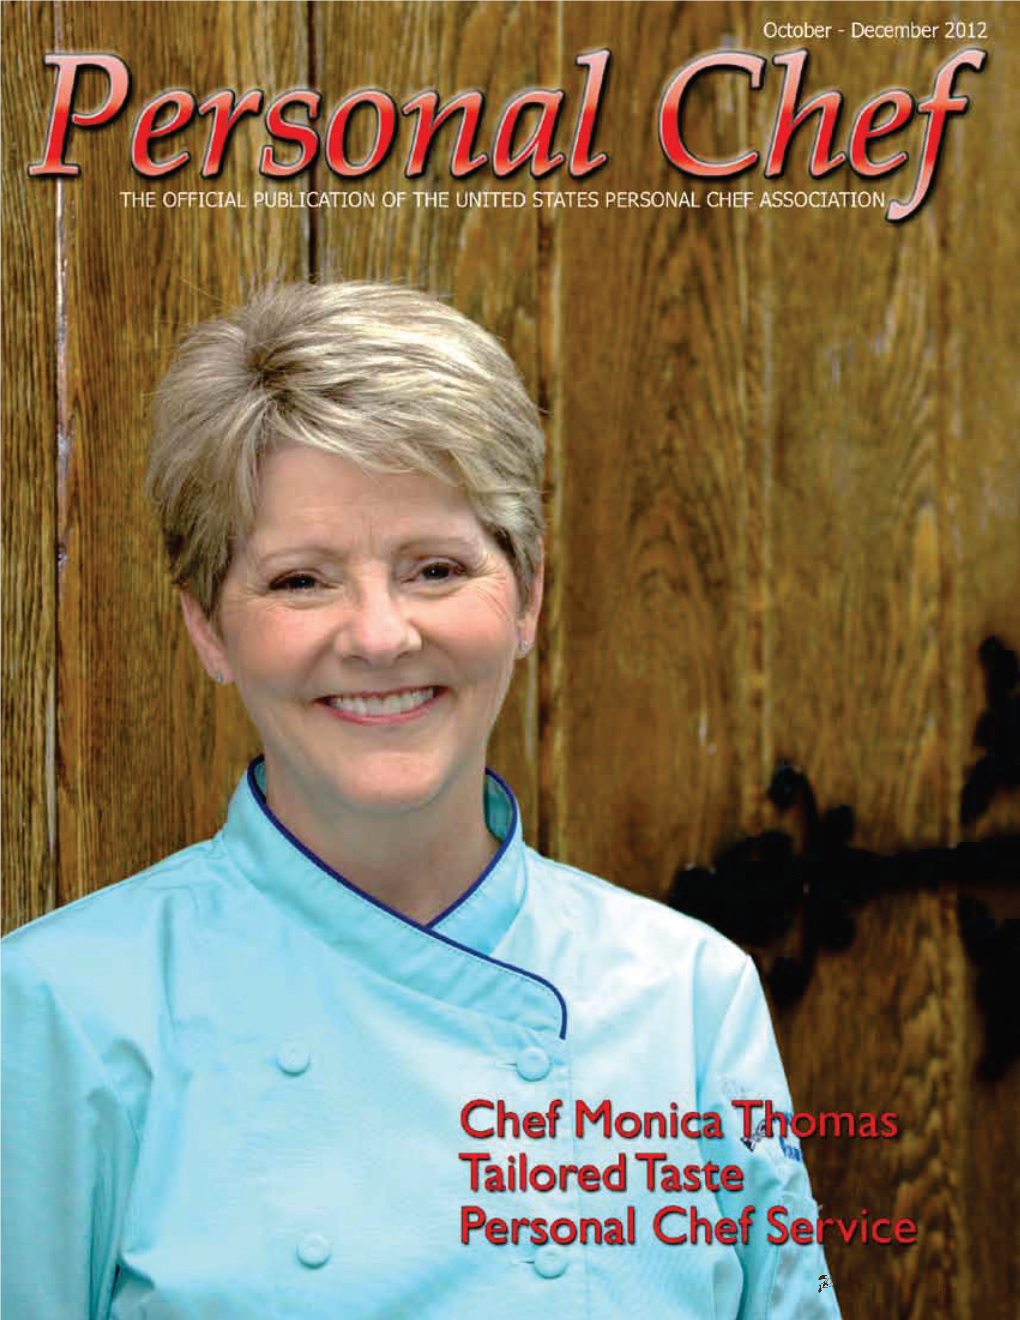 Personal Chef of the Year: Chef Monica Thomas